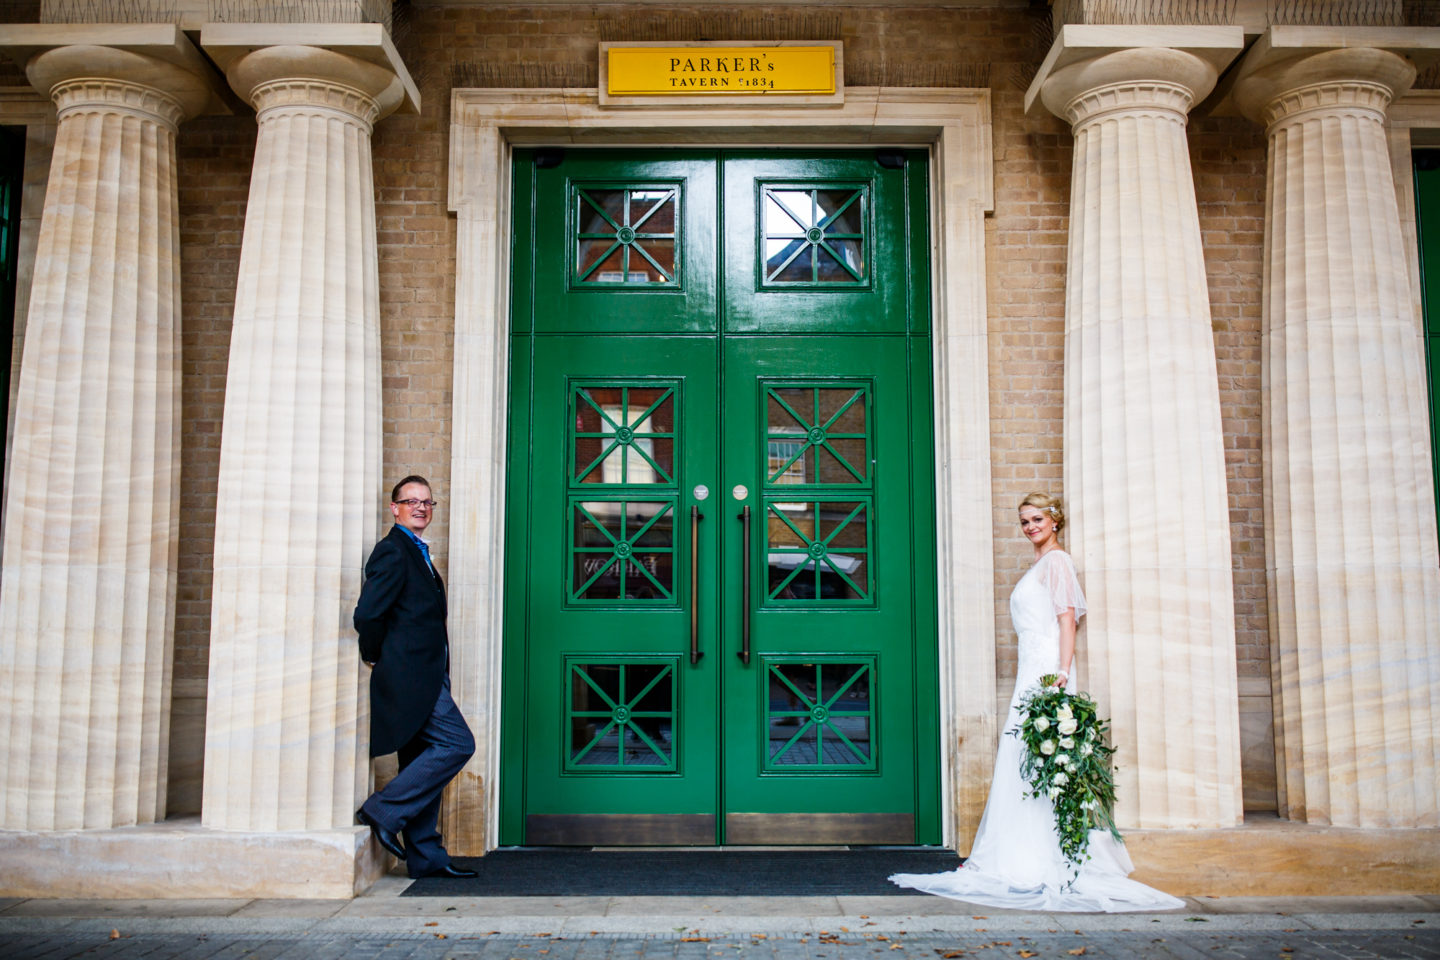 Intimate Wedding At Cambridge Registry Office With 1920s Inspired Wedding Dress